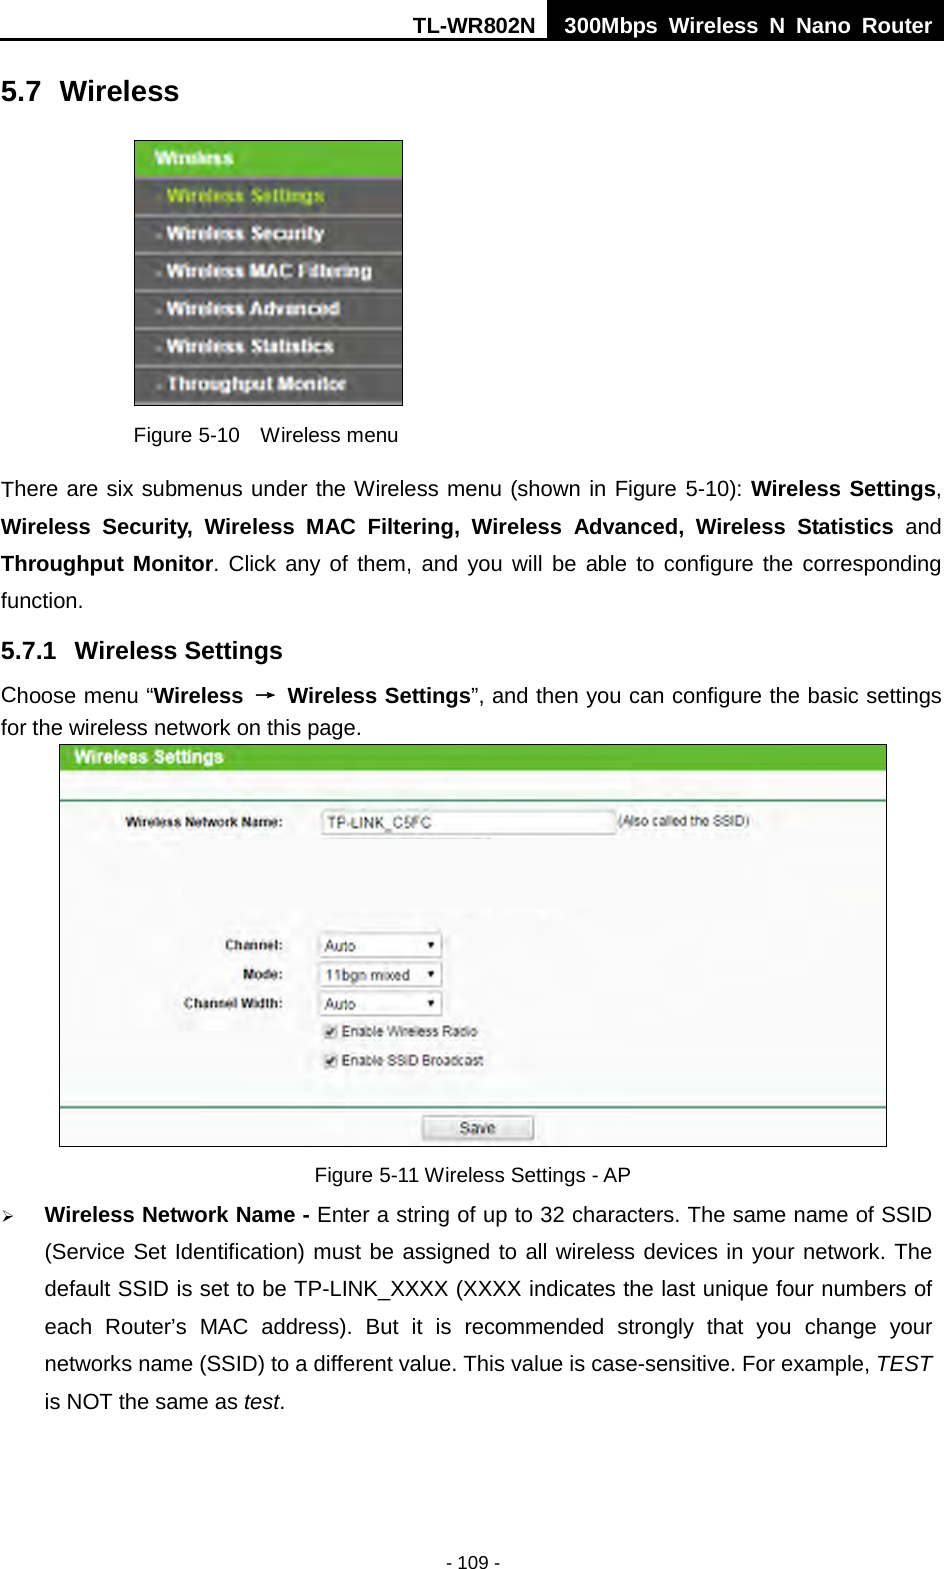 TL-WR802N  300Mbps Wireless N Nano Router  5.7 Wireless  Figure 5-10  Wireless menu There are six submenus under the Wireless menu (shown in Figure 5-10): Wireless Settings, Wireless Security, Wireless  MAC Filtering, Wireless Advanced, Wireless Statistics and Throughput Monitor. Click any of them, and you will be able to configure the corresponding function.   5.7.1 Wireless Settings Choose menu “Wireless  → Wireless Settings”, and then you can configure the basic settings for the wireless network on this page.  Figure 5-11 Wireless Settings - AP  Wireless Network Name - Enter a string of up to 32 characters. The same name of SSID (Service Set Identification) must be assigned to all wireless devices in your network. The default SSID is set to be TP-LINK_XXXX (XXXX indicates the last unique four numbers of each Router’s MAC address). But it is recommended strongly that you change your networks name (SSID) to a different value. This value is case-sensitive. For example, TEST is NOT the same as test. - 109 - 